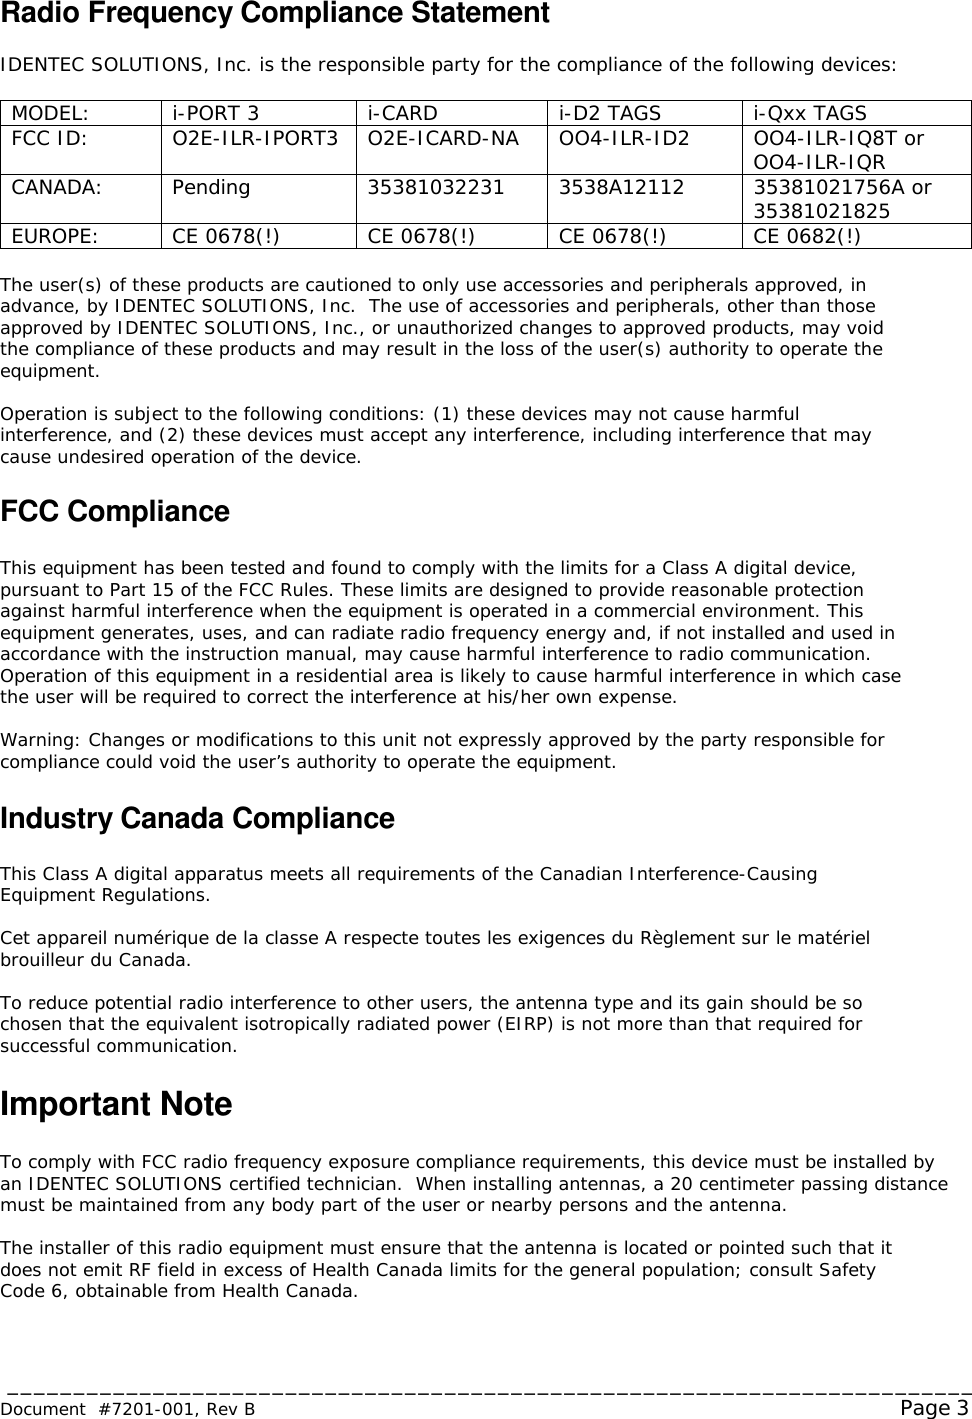  _________________________________________________________________________ Document  #7201-001, Rev B  Page 3 Radio Frequency Compliance Statement  IDENTEC SOLUTIONS, Inc. is the responsible party for the compliance of the following devices:  MODEL:  i-PORT 3  i-CARD  i-D2 TAGS  i-Qxx TAGS FCC ID:  O2E-ILR-IPORT3  O2E-ICARD-NA  OO4-ILR-ID2  OO4-ILR-IQ8T or OO4-ILR-IQR CANADA:  Pending  35381032231  3538A12112  35381021756A or  35381021825 EUROPE:  CE 0678(!)  CE 0678(!)  CE 0678(!)  CE 0682(!)  The user(s) of these products are cautioned to only use accessories and peripherals approved, in advance, by IDENTEC SOLUTIONS, Inc.  The use of accessories and peripherals, other than those approved by IDENTEC SOLUTIONS, Inc., or unauthorized changes to approved products, may void the compliance of these products and may result in the loss of the user(s) authority to operate the equipment.  Operation is subject to the following conditions: (1) these devices may not cause harmful interference, and (2) these devices must accept any interference, including interference that may cause undesired operation of the device.  FCC Compliance  This equipment has been tested and found to comply with the limits for a Class A digital device, pursuant to Part 15 of the FCC Rules. These limits are designed to provide reasonable protection against harmful interference when the equipment is operated in a commercial environment. This equipment generates, uses, and can radiate radio frequency energy and, if not installed and used in accordance with the instruction manual, may cause harmful interference to radio communication. Operation of this equipment in a residential area is likely to cause harmful interference in which case the user will be required to correct the interference at his/her own expense.  Warning: Changes or modifications to this unit not expressly approved by the party responsible for compliance could void the user’s authority to operate the equipment.  Industry Canada Compliance  This Class A digital apparatus meets all requirements of the Canadian Interference-Causing Equipment Regulations.  Cet appareil numérique de la classe A respecte toutes les exigences du Règlement sur le matériel brouilleur du Canada.  To reduce potential radio interference to other users, the antenna type and its gain should be so chosen that the equivalent isotropically radiated power (EIRP) is not more than that required for successful communication.  Important Note  To comply with FCC radio frequency exposure compliance requirements, this device must be installed by an IDENTEC SOLUTIONS certified technician.  When installing antennas, a 20 centimeter passing distance must be maintained from any body part of the user or nearby persons and the antenna.   The installer of this radio equipment must ensure that the antenna is located or pointed such that it does not emit RF field in excess of Health Canada limits for the general population; consult Safety Code 6, obtainable from Health Canada. 